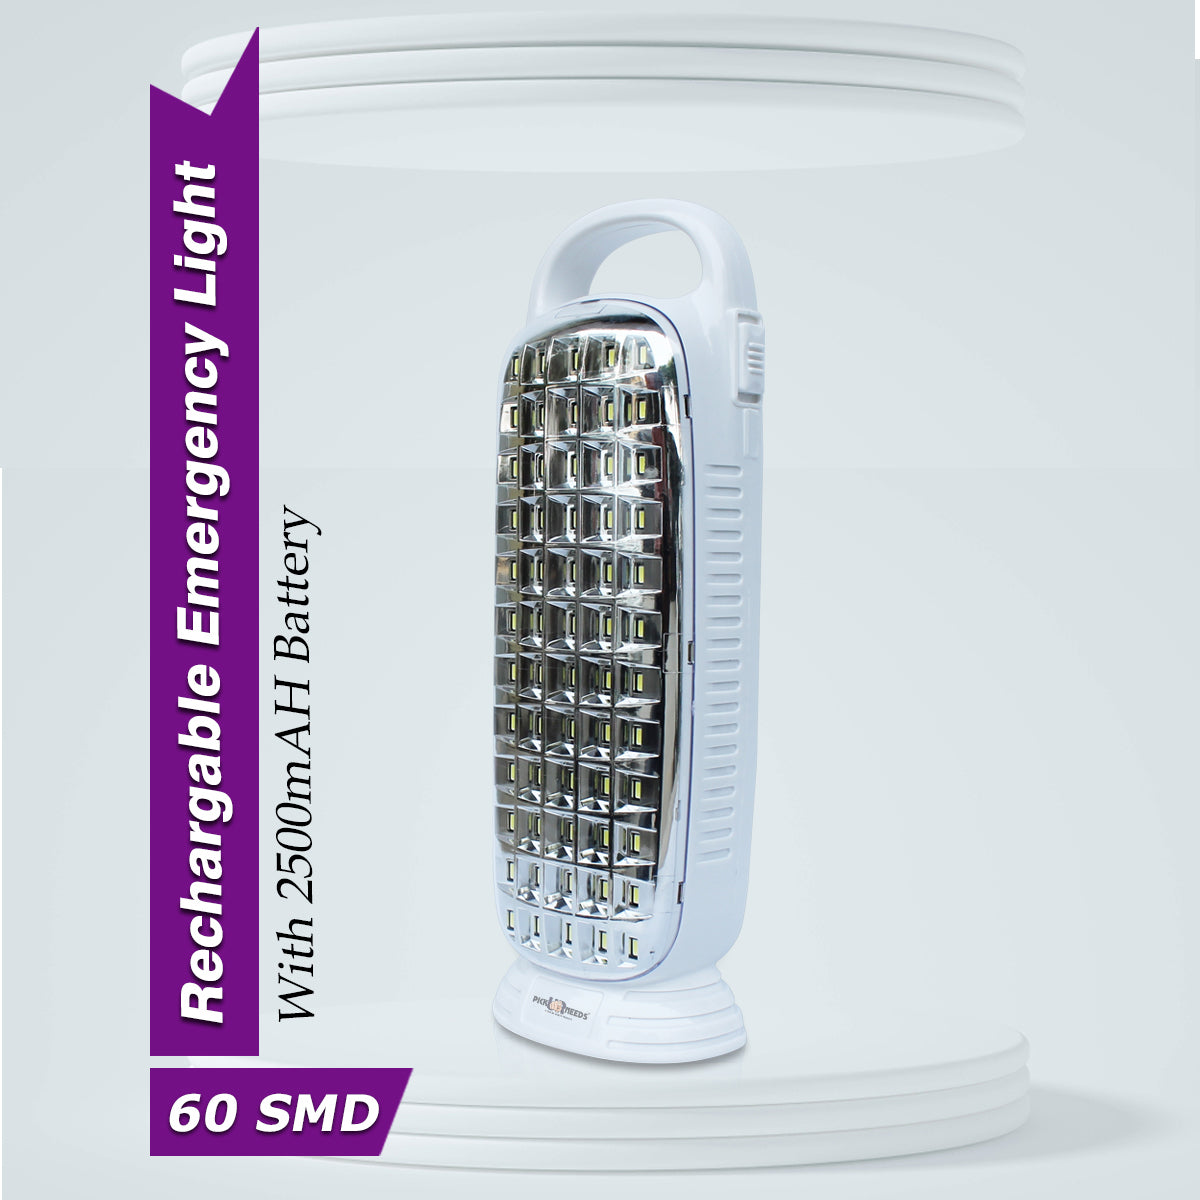 Pick Ur Needs Emergency Rechargeable Light 40 SMD Power Full Backup With 15 hrs Lantern Emergency Light